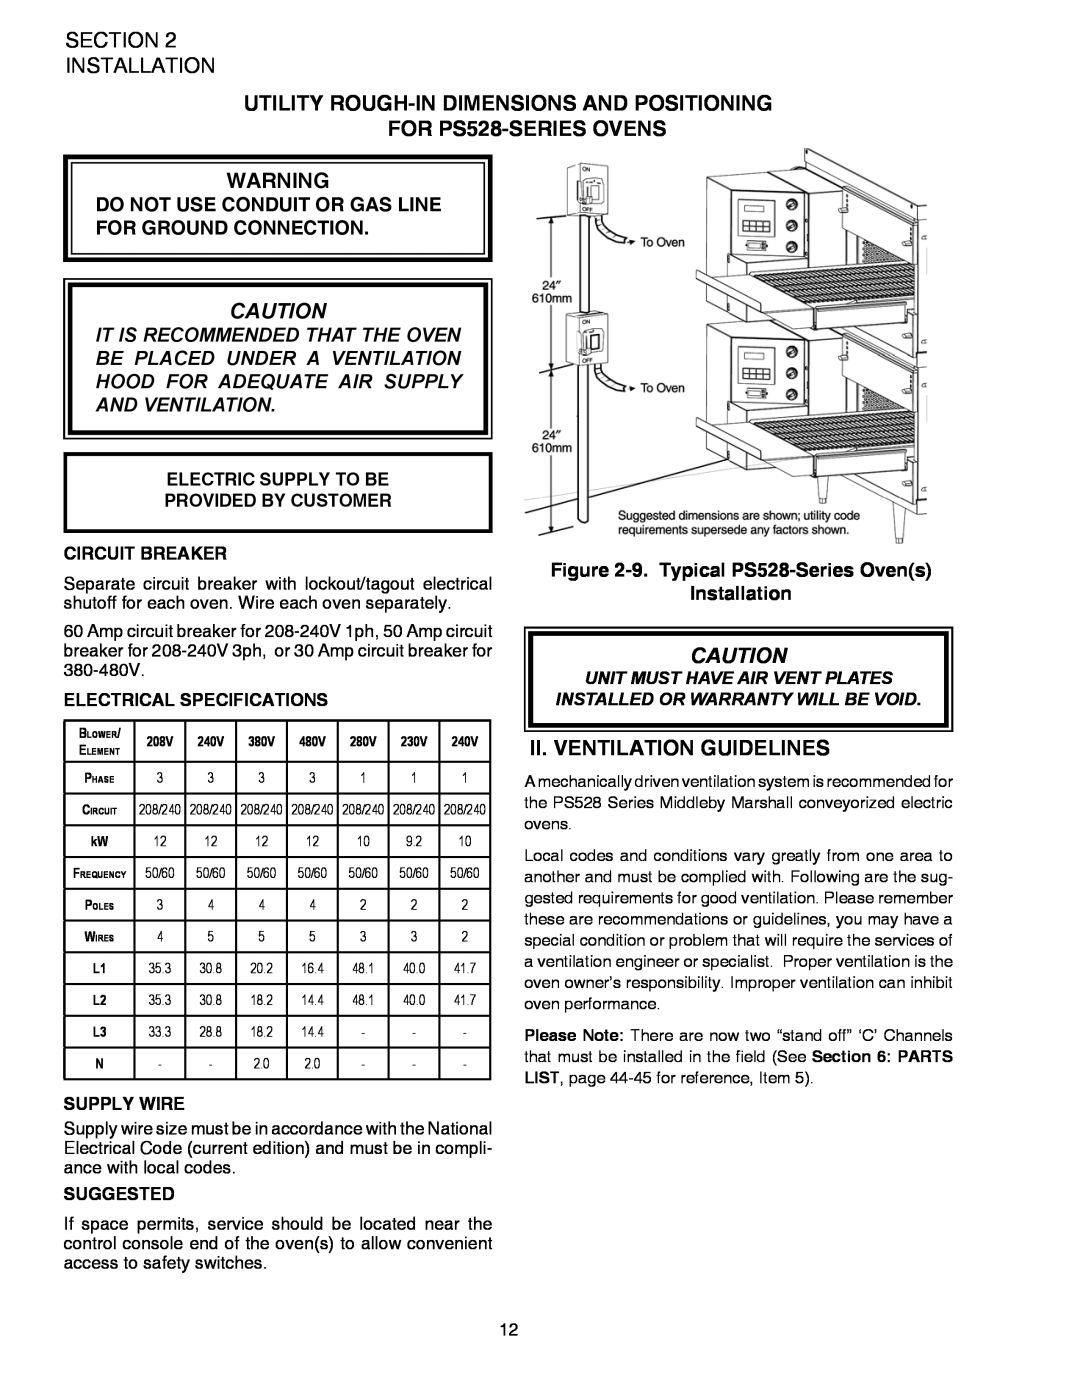 Middleby Marshall PS528 (Double), PS528E UTILITY ROUGH-IN DIMENSIONS AND POSITIONING FOR PS528-SERIES OVENS, Supply Wire 